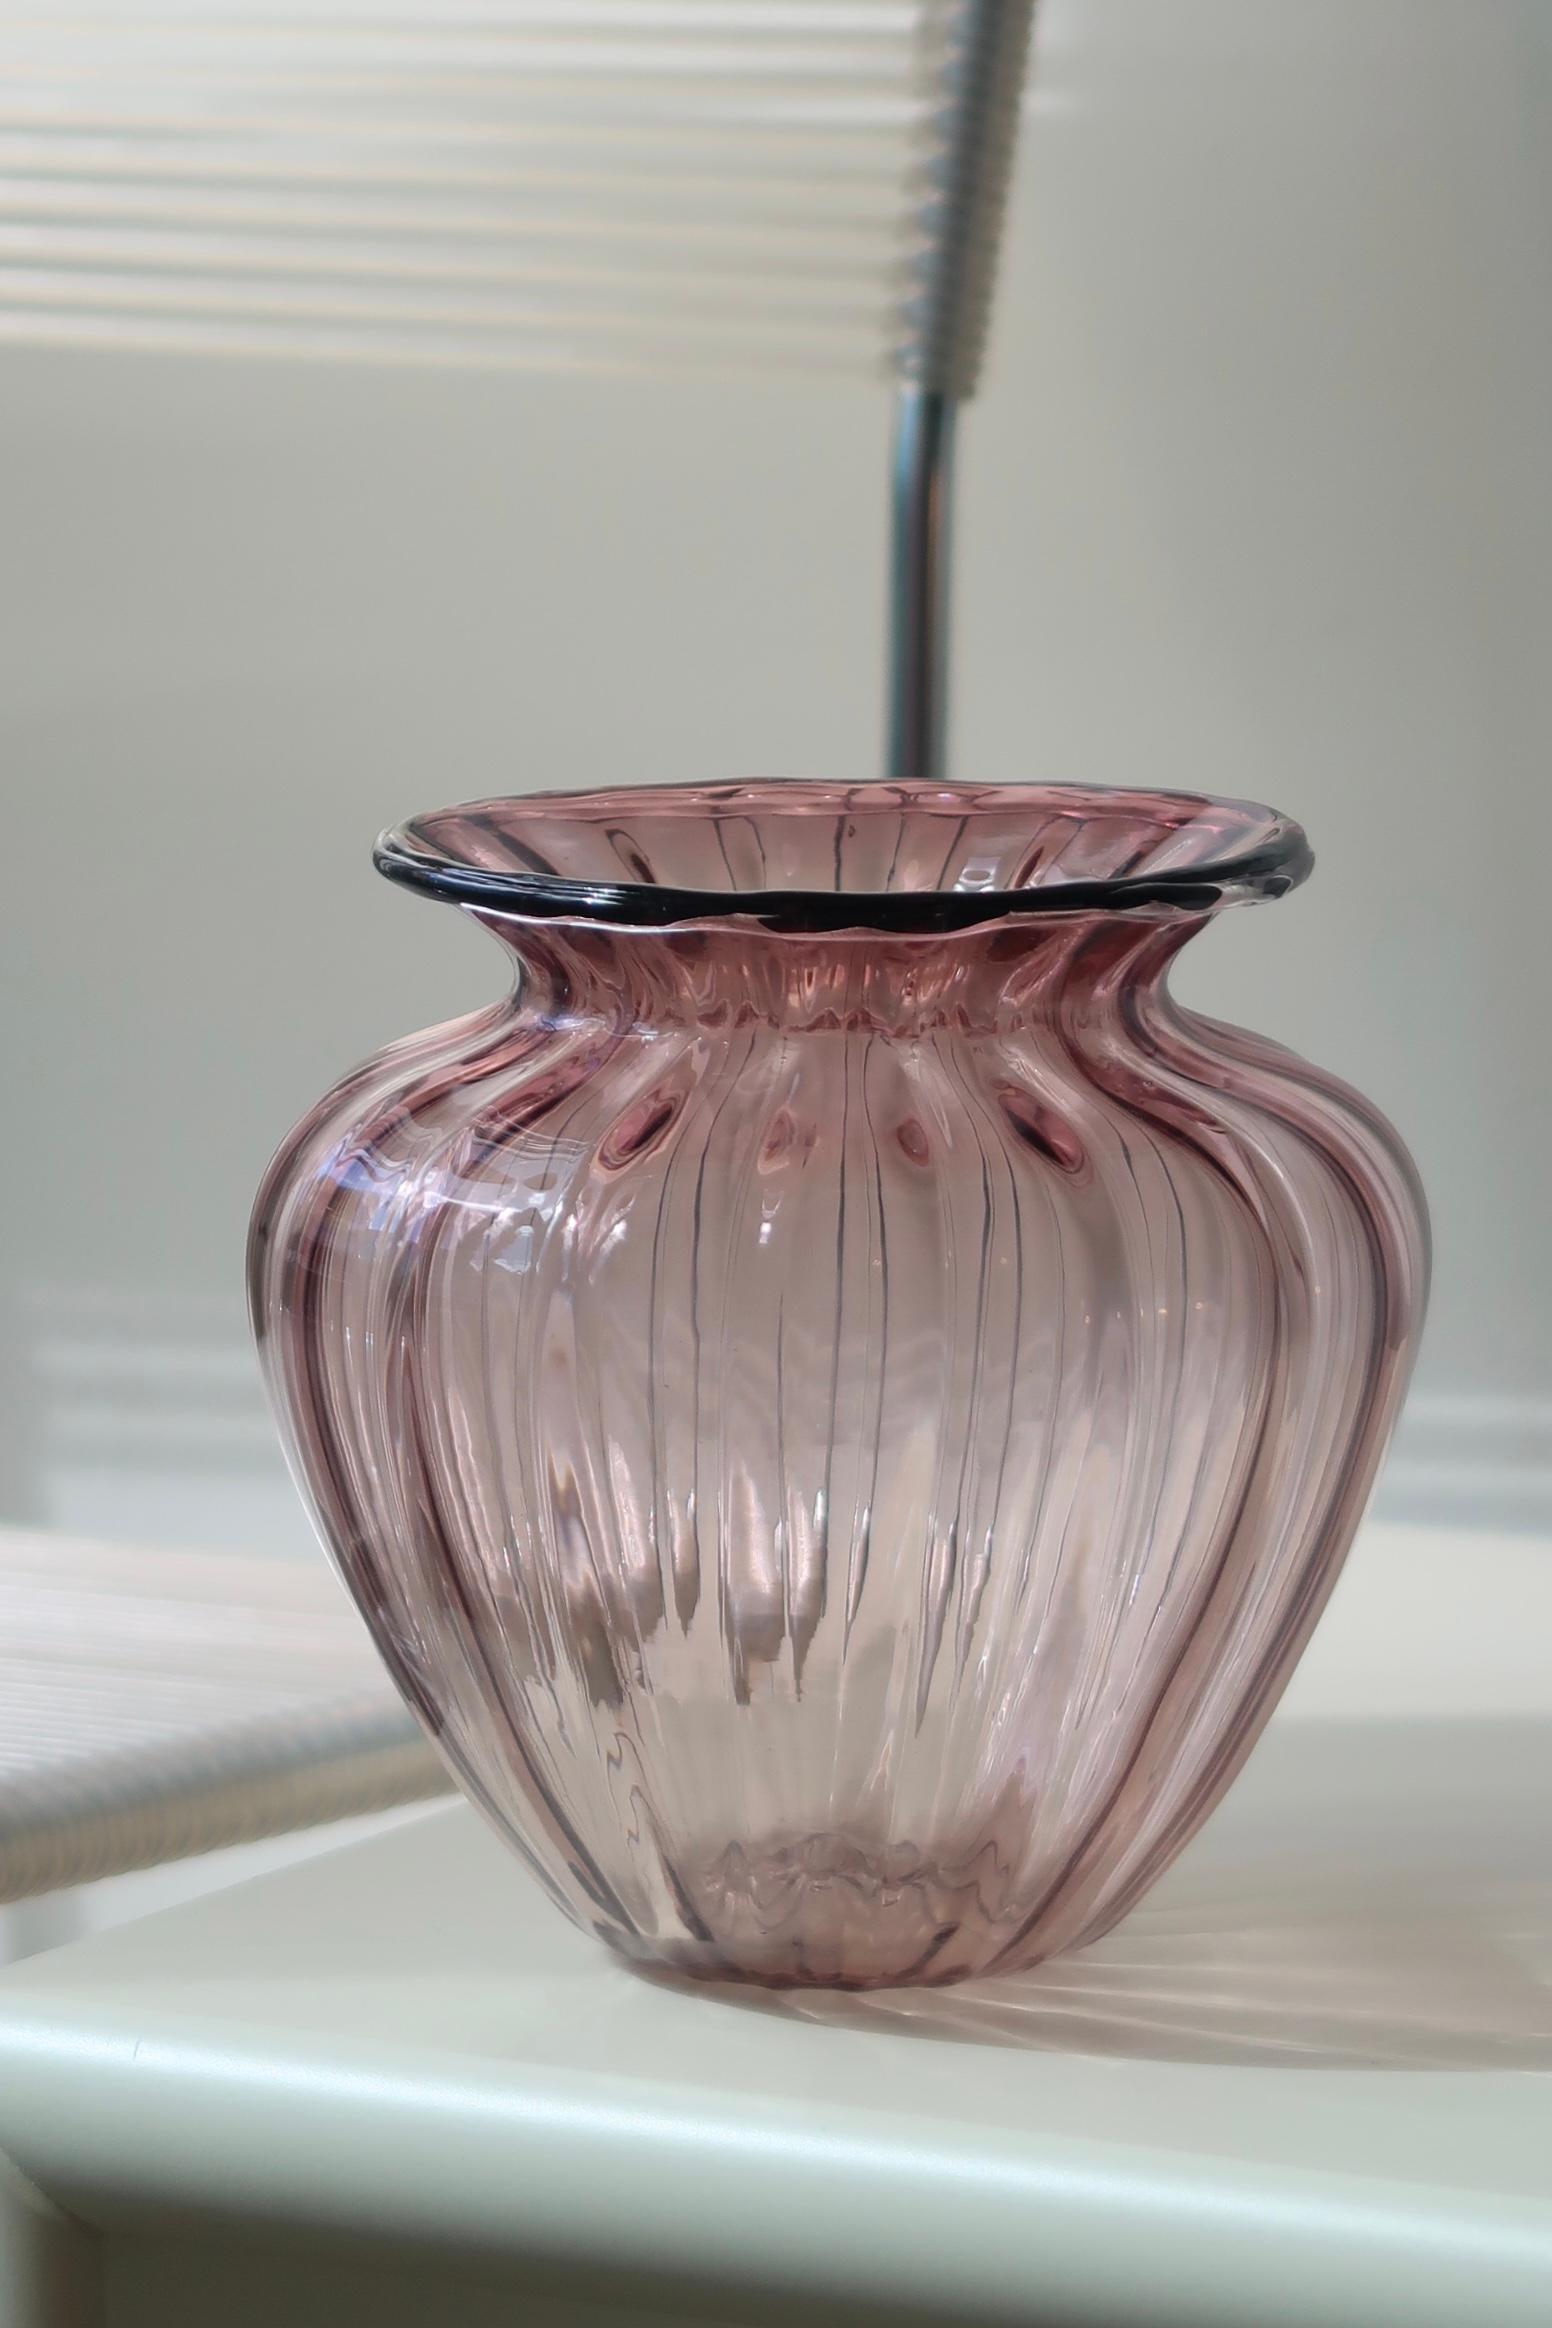 Vintage Murano Seguso glass vase in a beautiful shade of purple. Mouth-blown in a Classic shape. Handmade in Italy, 1950s/1960s. Measures : H:15 cm D:14 cm.